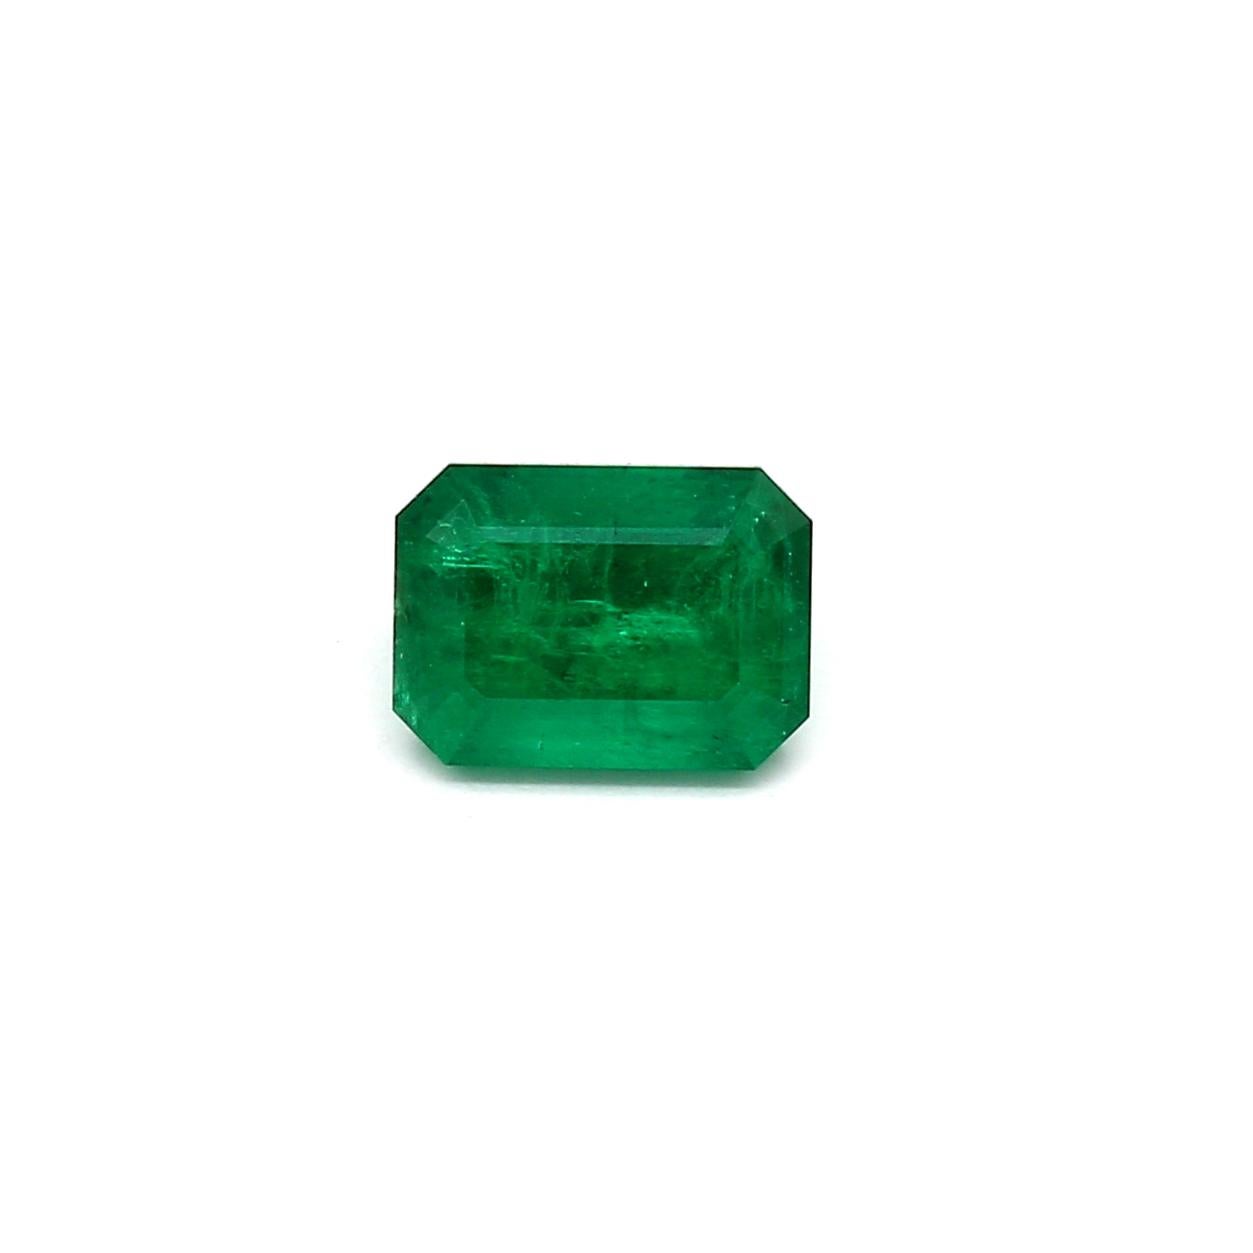 An amazing Russian Emerald which allows jewelers to create a unique piece of wearable art.
This exceptional quality gemstone would make a custom-made jewelry design. Perfect for a Ring or Pendant.

Shape - Octagon
Weight - 1.23 ct
Treatment - Minor